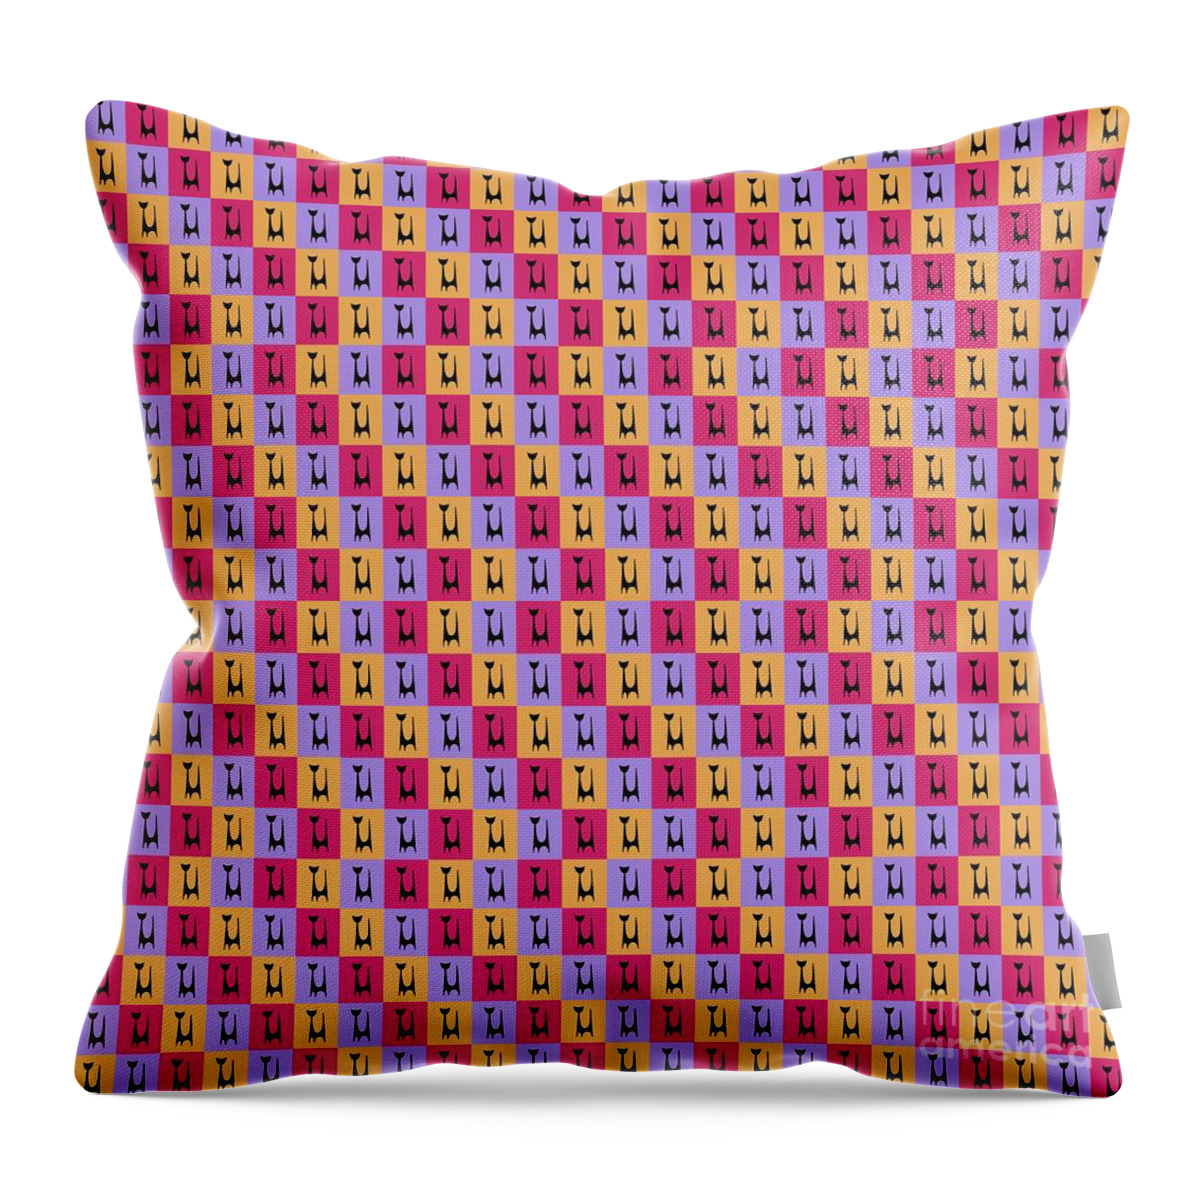 Atomic Cat Throw Pillow featuring the digital art Atomic Cat 1 on Melon, Fuchsia and Melon by Donna Mibus